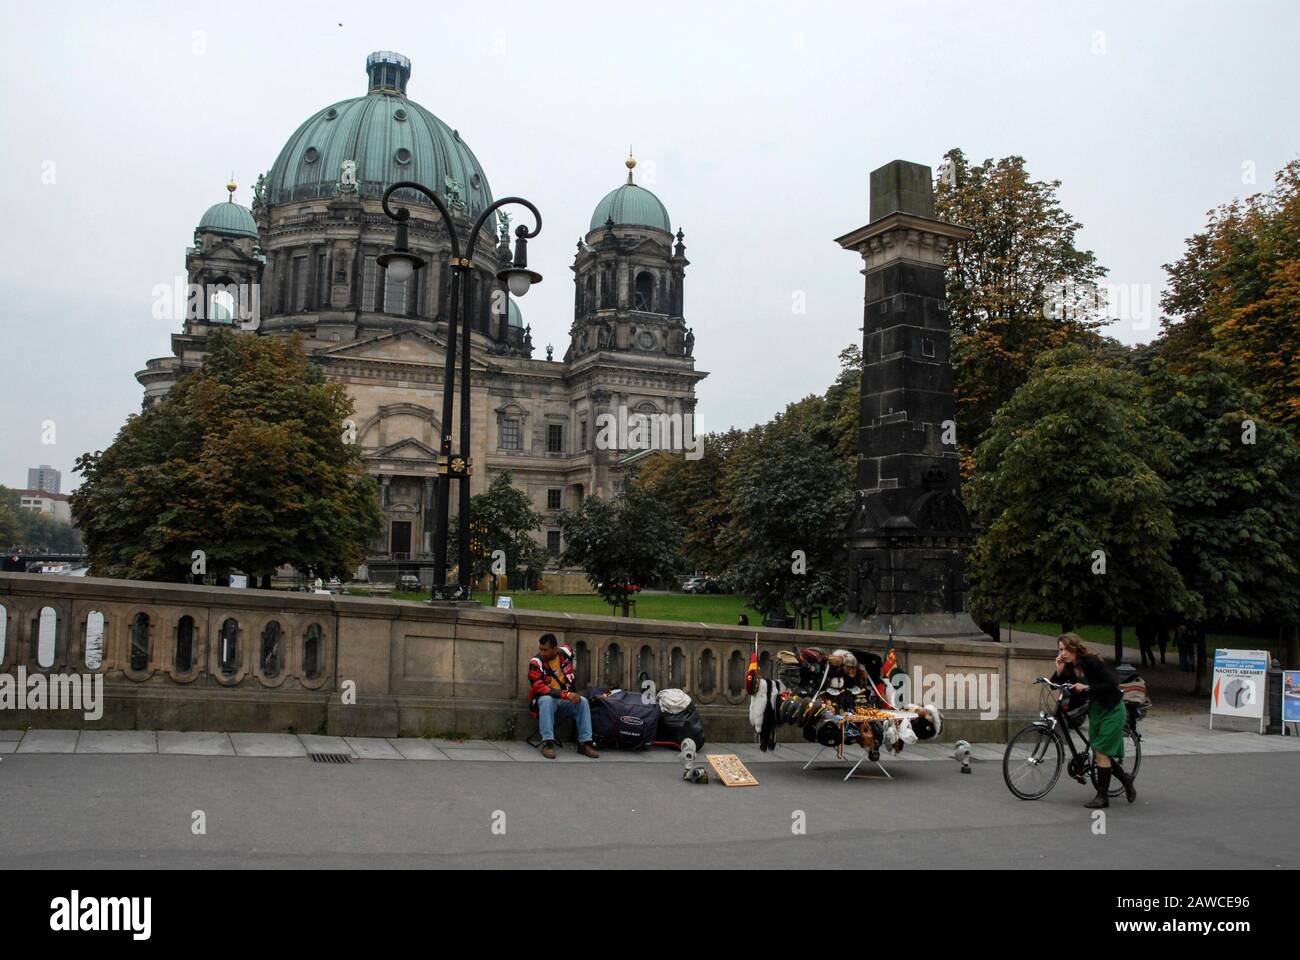 A street hawker with his East German and Russian military souvenir stall near the Berliner Dom (Berlin Cathedral)  on the banks of the River Spree in Stock Photo